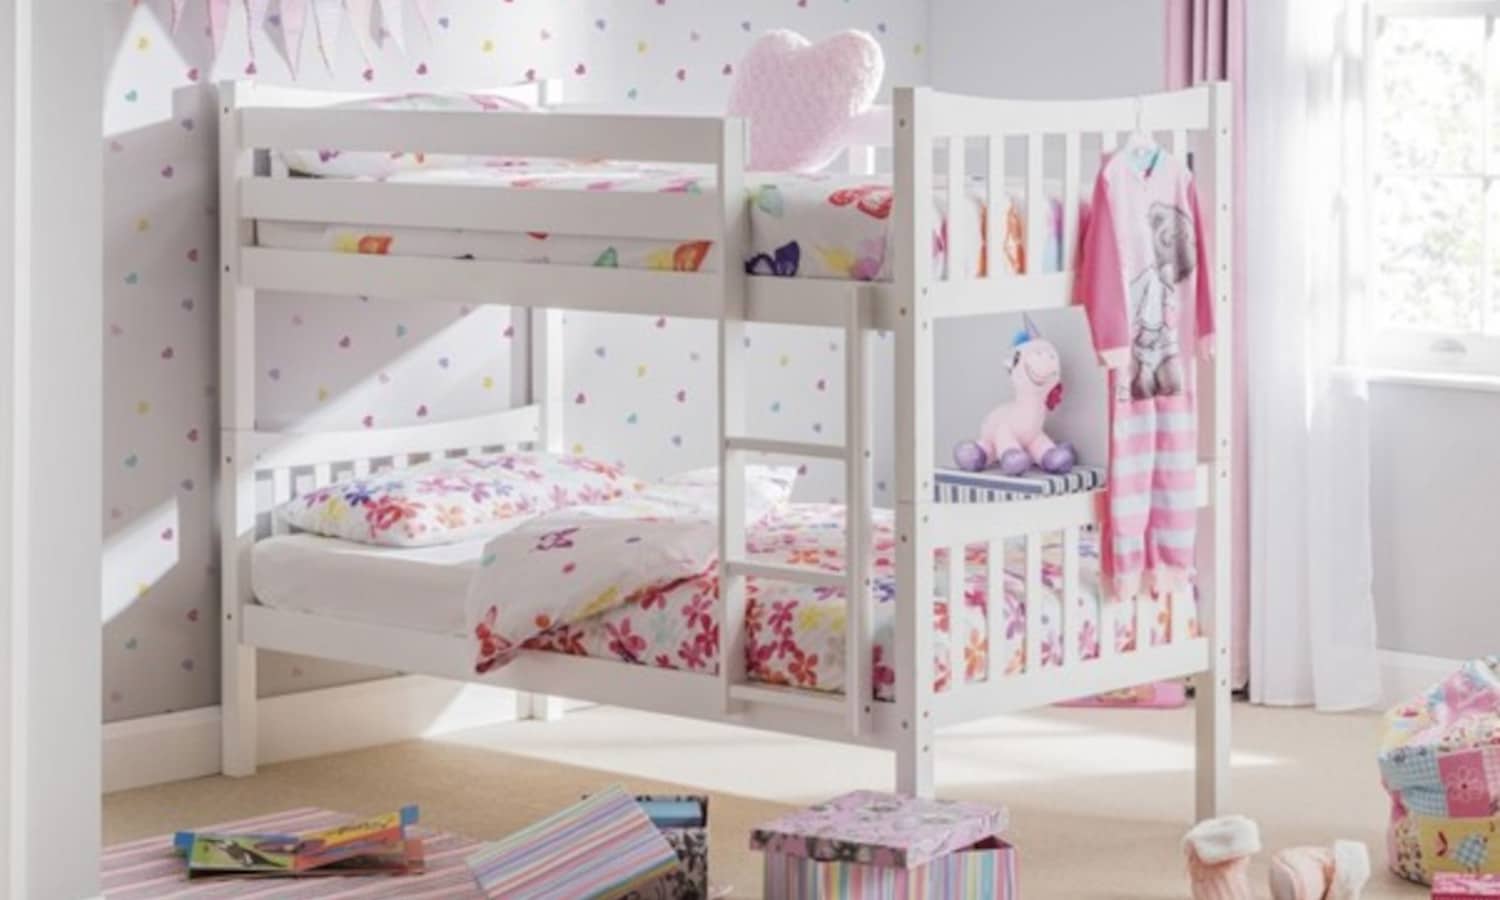 White bunk bed in a girl's bedroom